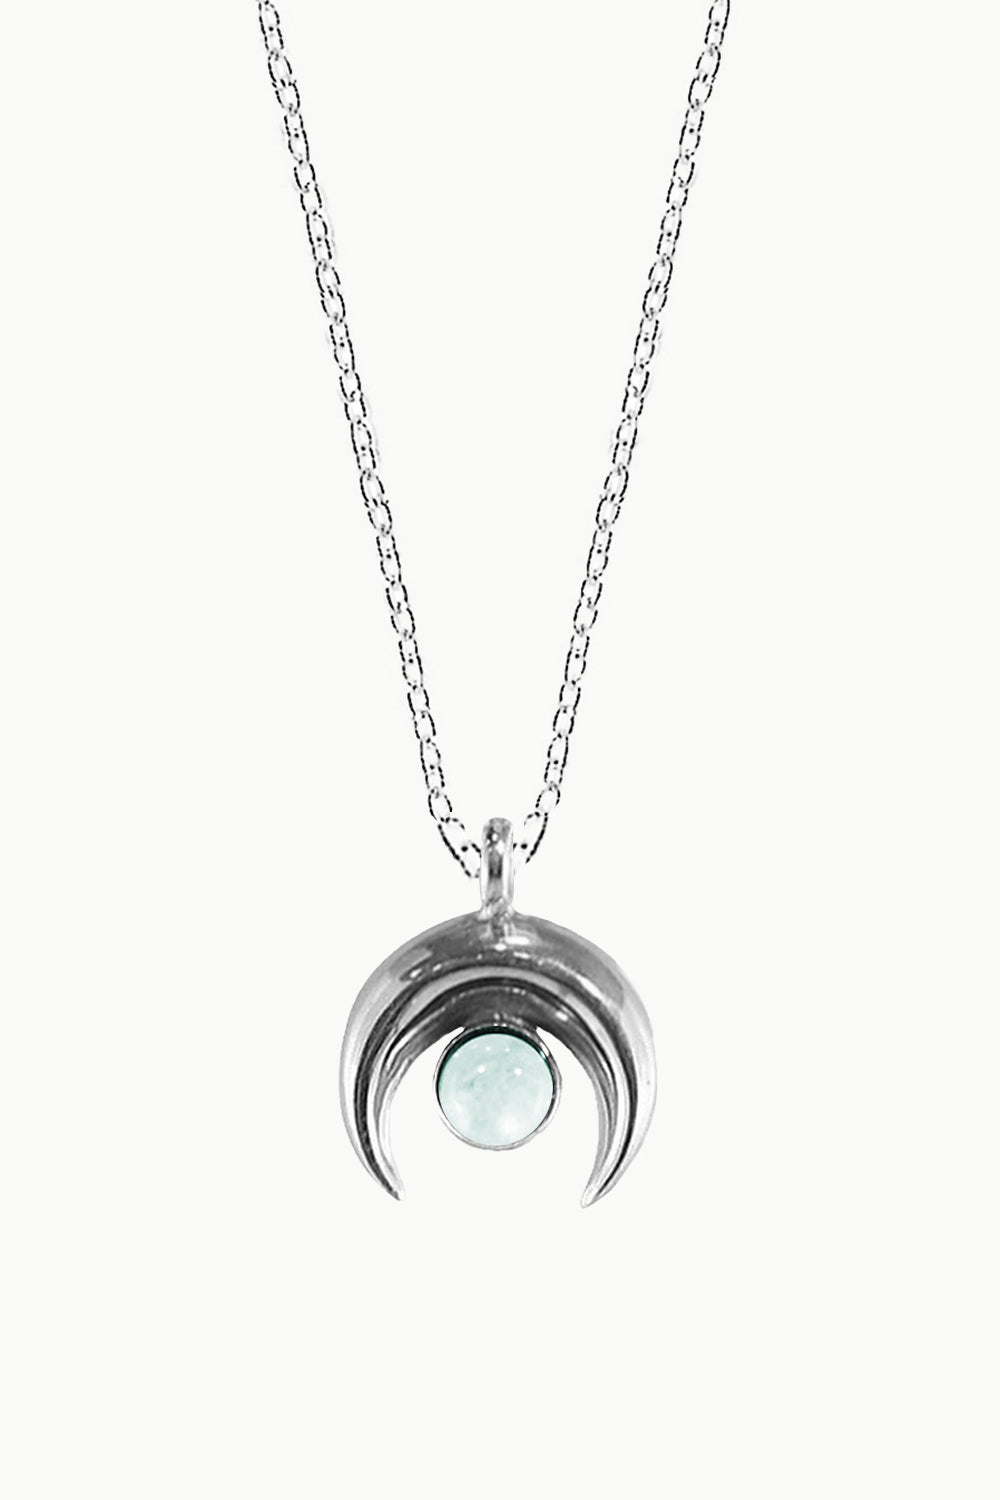 Sivalya Sterling Silver Gemstone Necklace - Crescent Moon